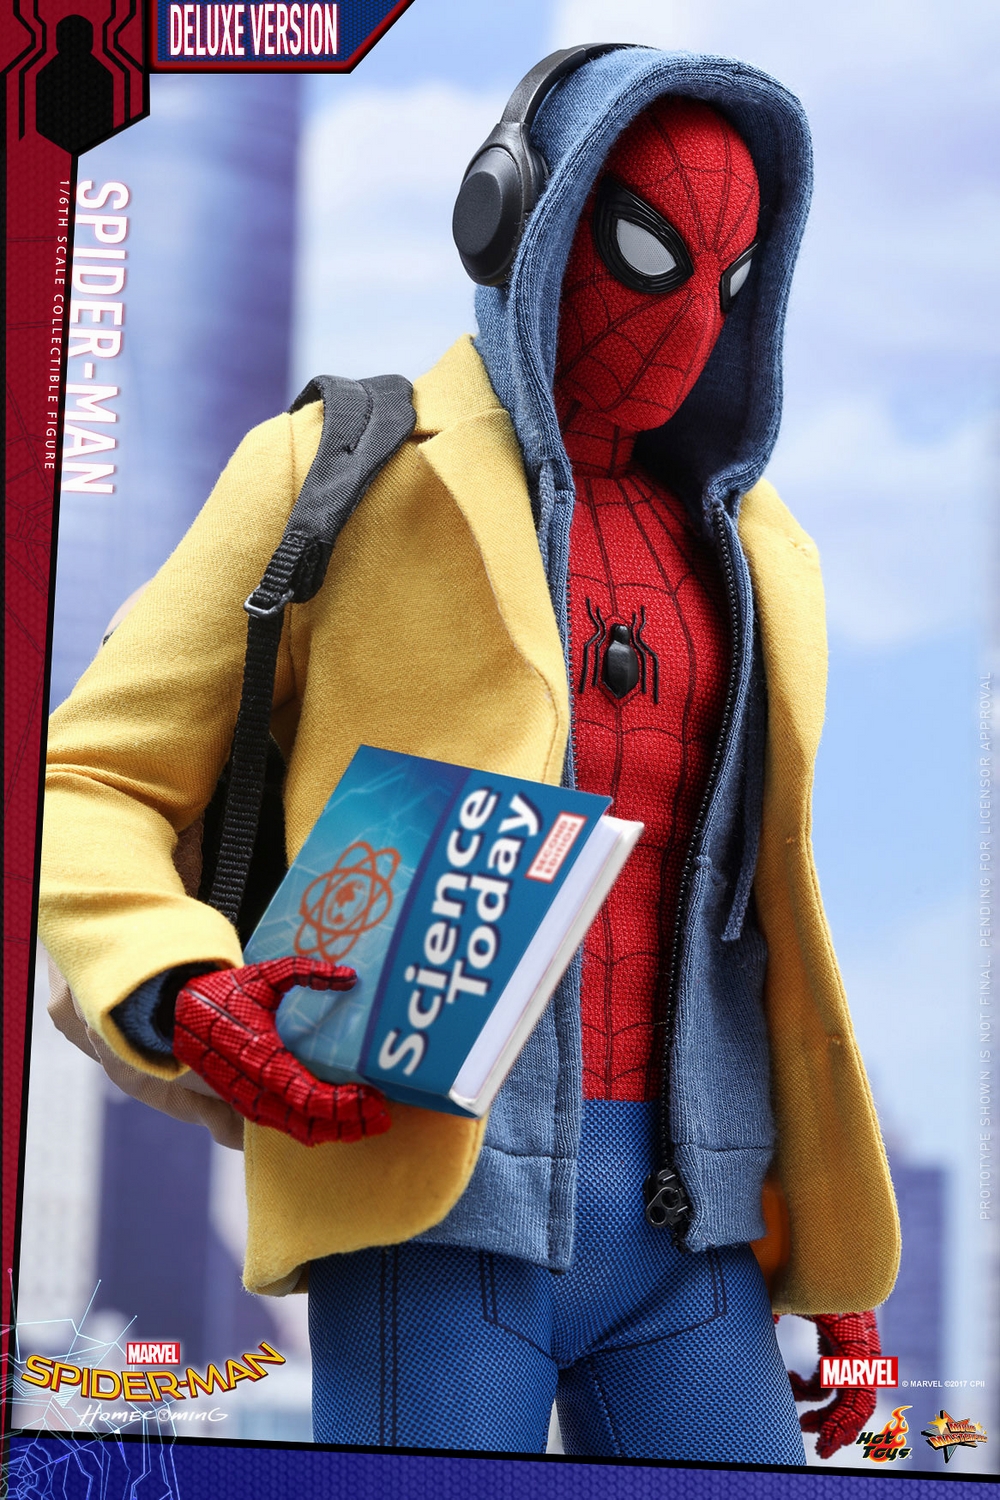 Hot-Toys-MMS426-Spider-Man-Homecoming-Deluxe-004.jpg